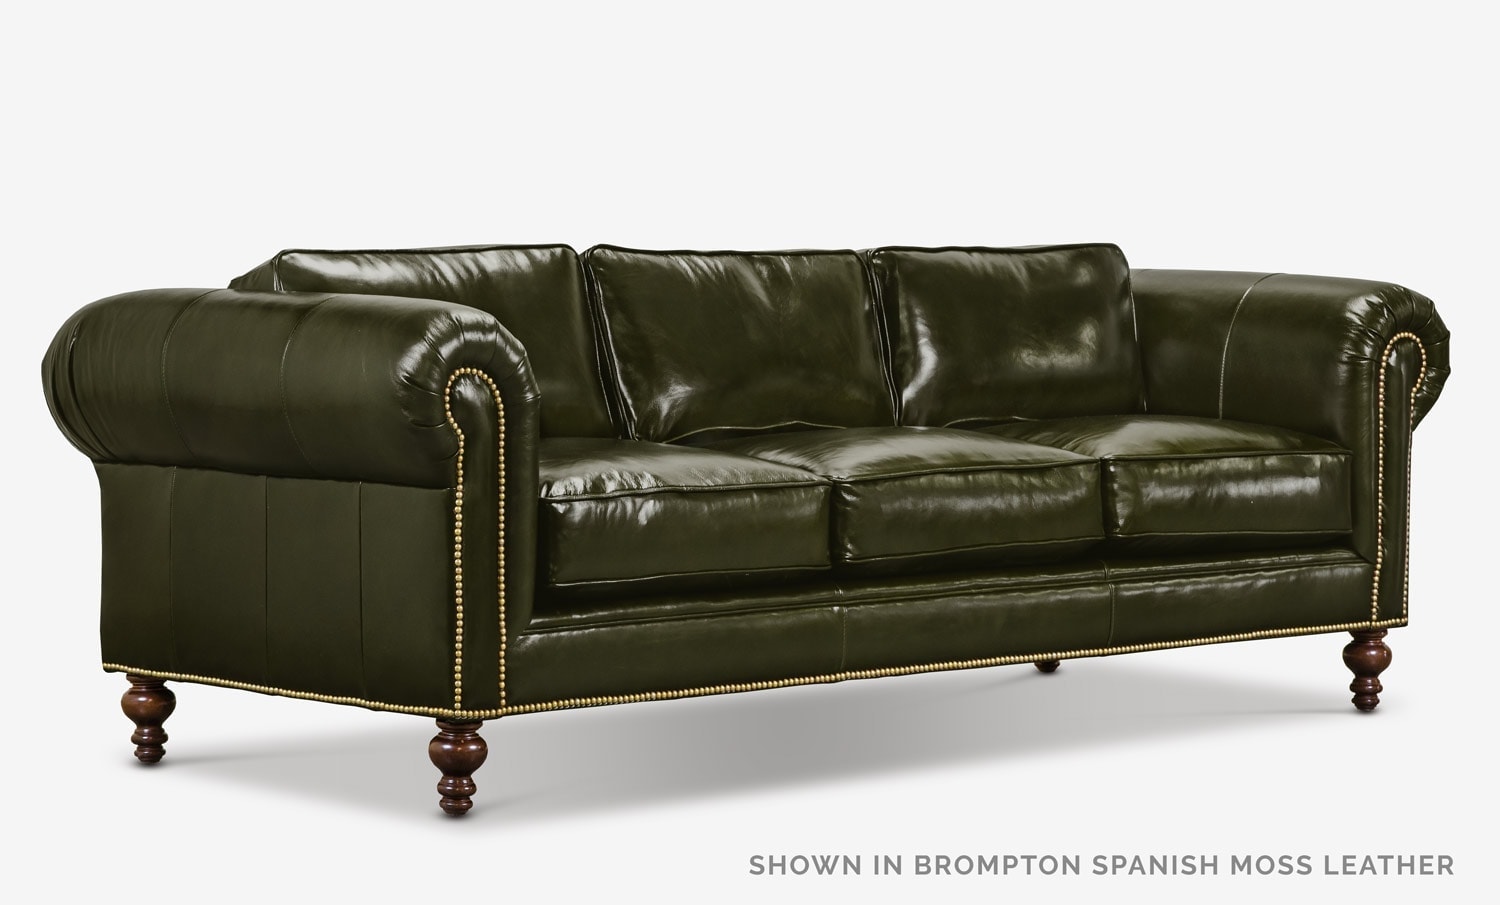 The Sidney: Modern Chesterfield Sofa in Brompton Spanish Moss Leather